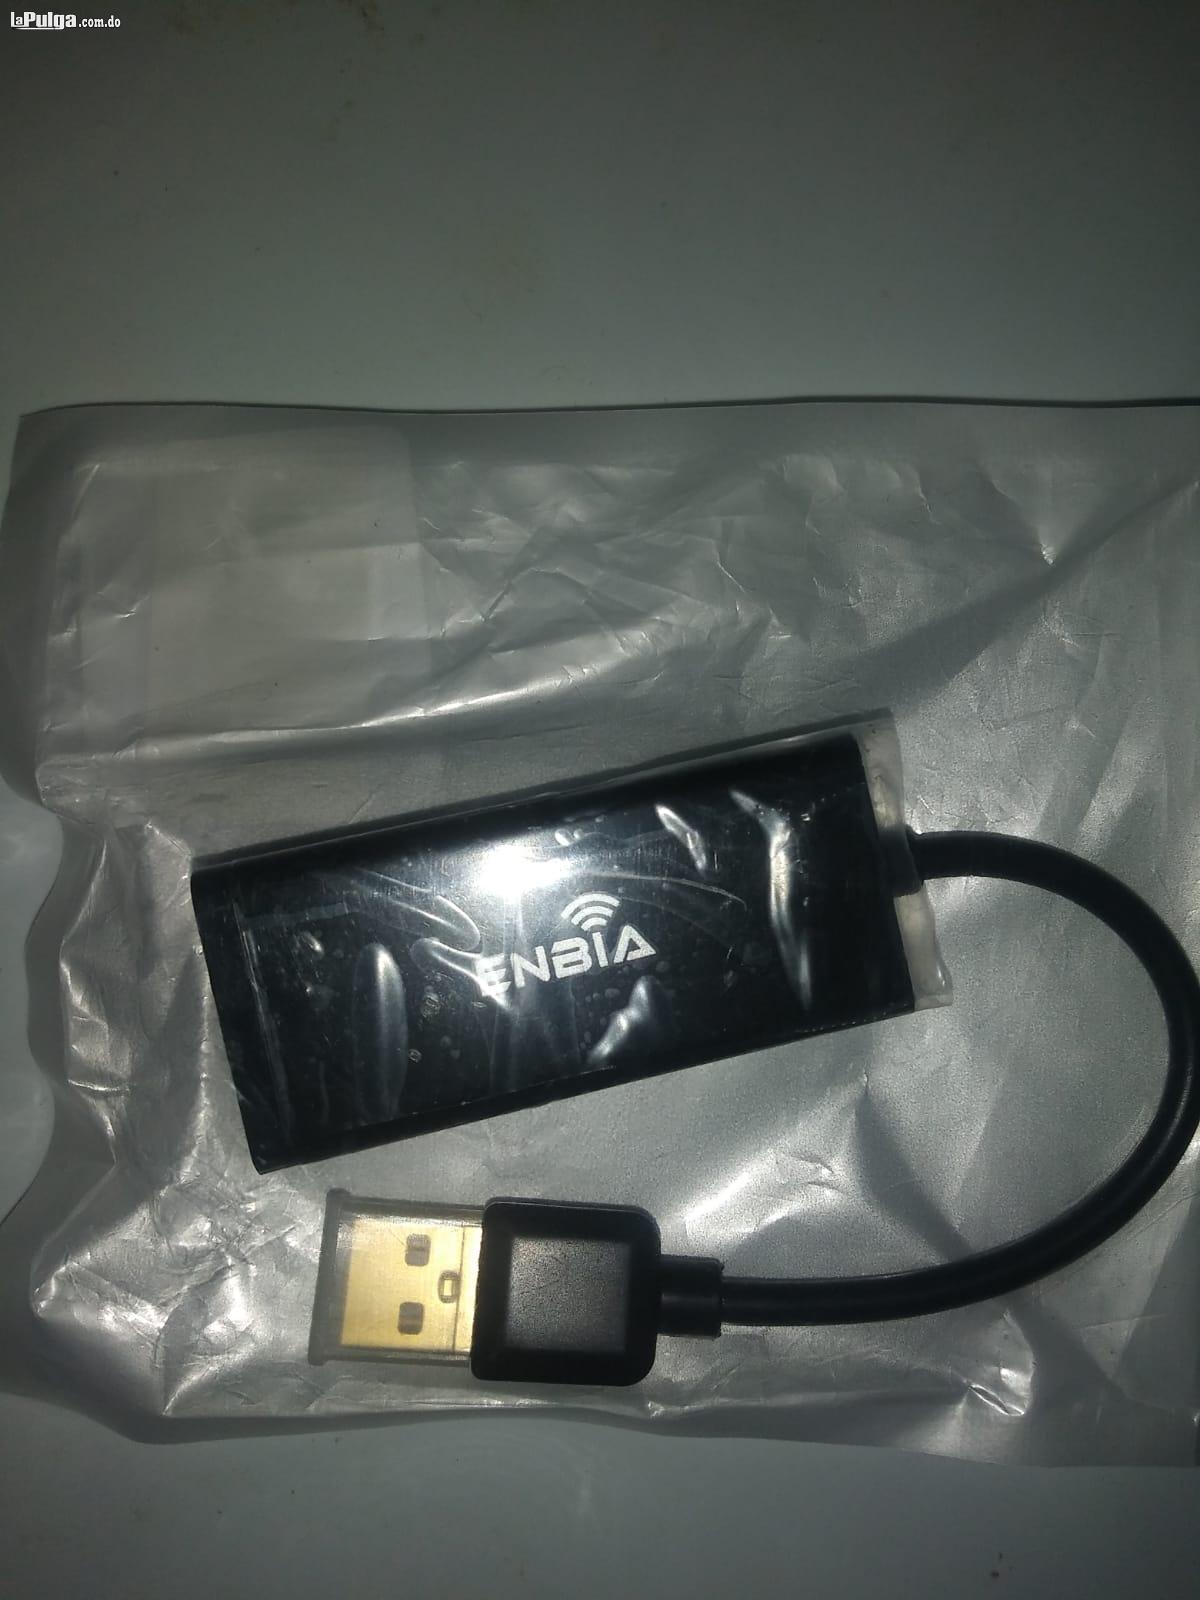 USB 2.0 to ethernet  Adapter to RJ45 Network  Foto 7000777-1.jpg